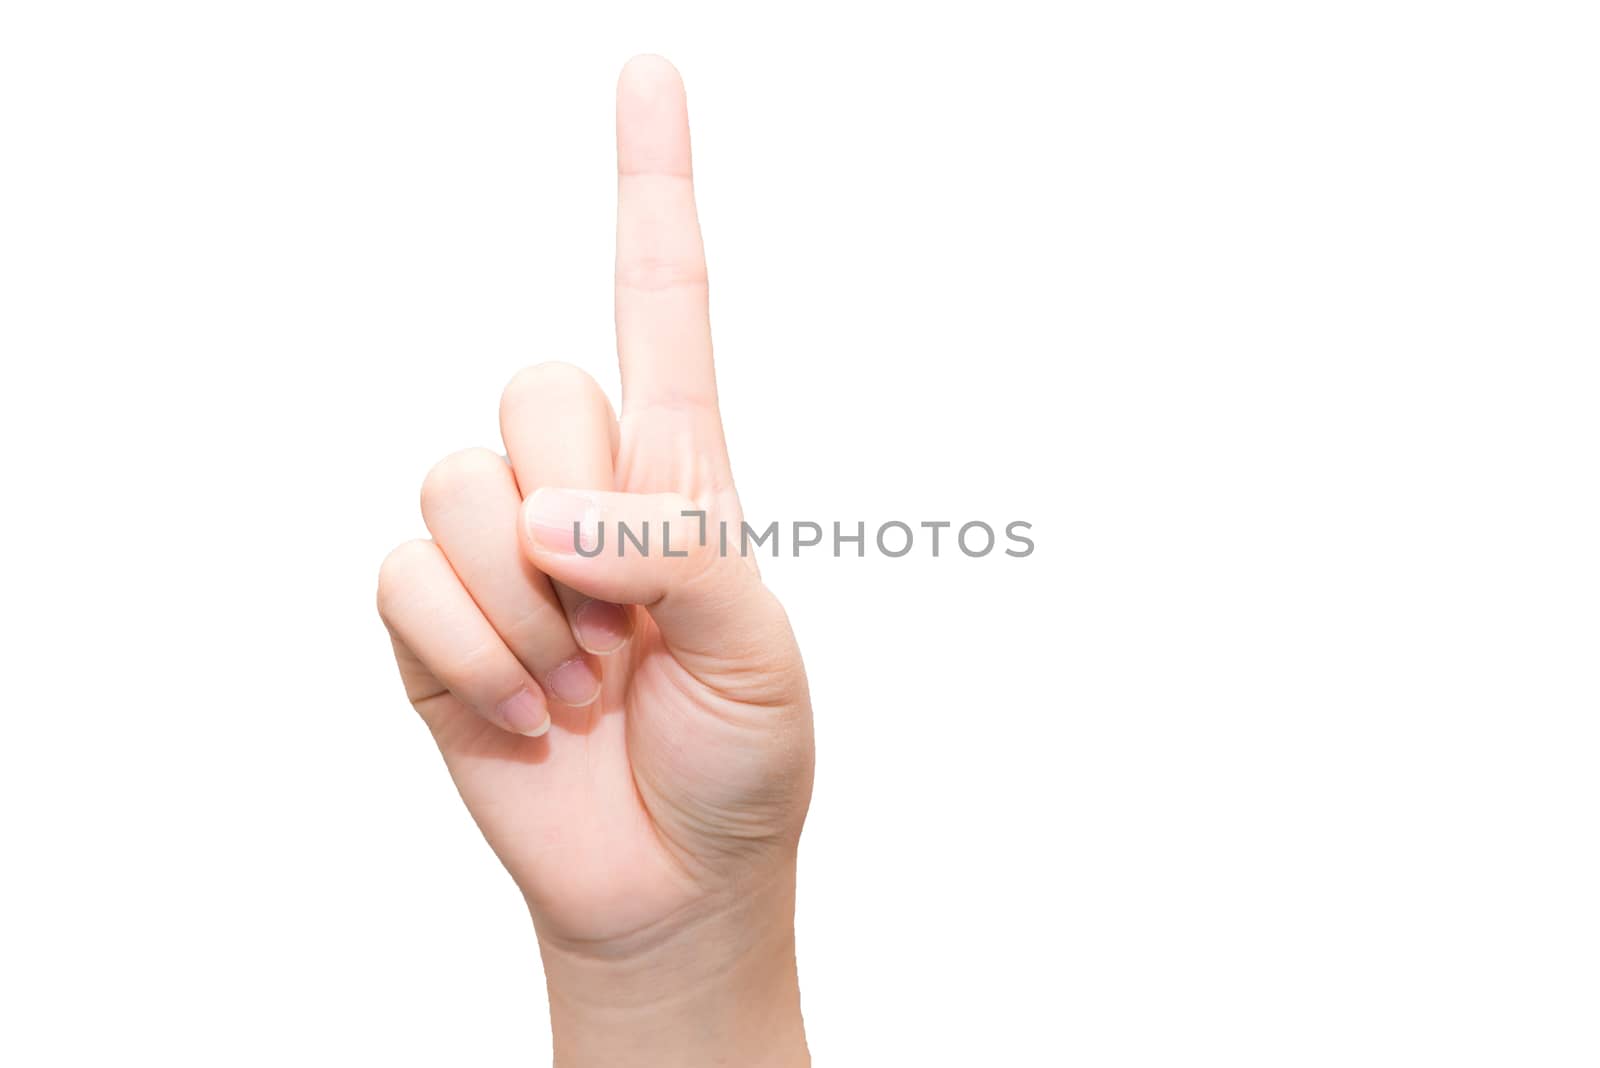 Human hand with one finger sticking up on light gray background